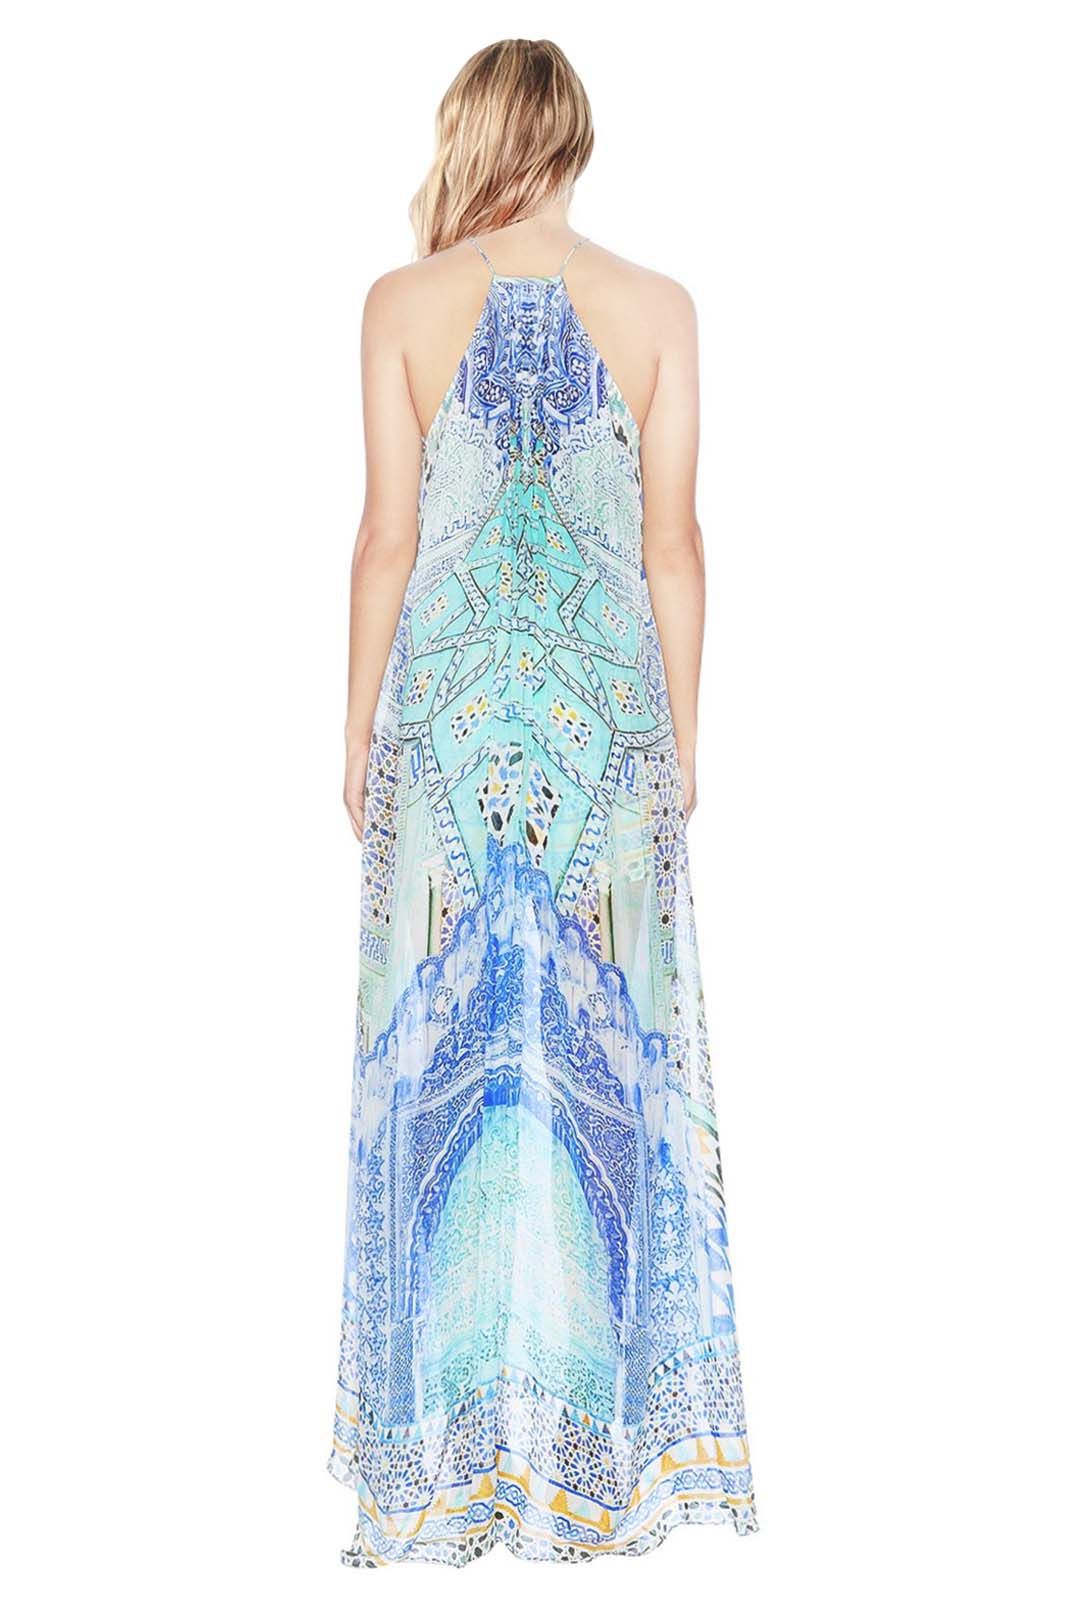 Camilla - Sultans Gate Sheery Overlay Dress - Back - Prints